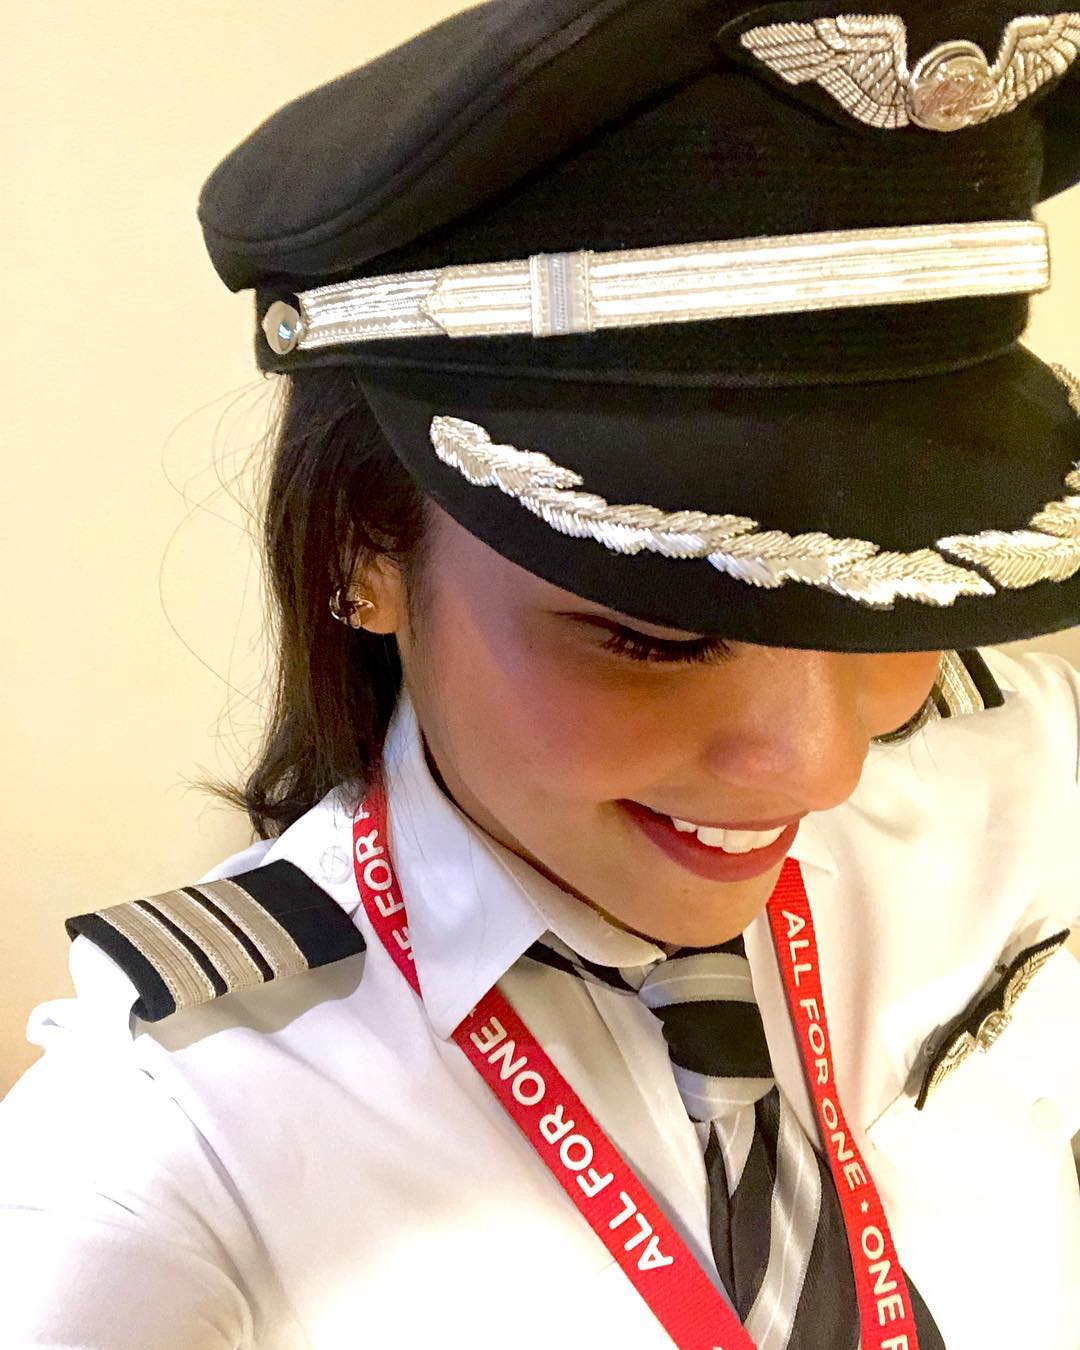 This Filipina Pilot Is An Inspiration For All The Girls Who Wants To Fulfill Their Dream